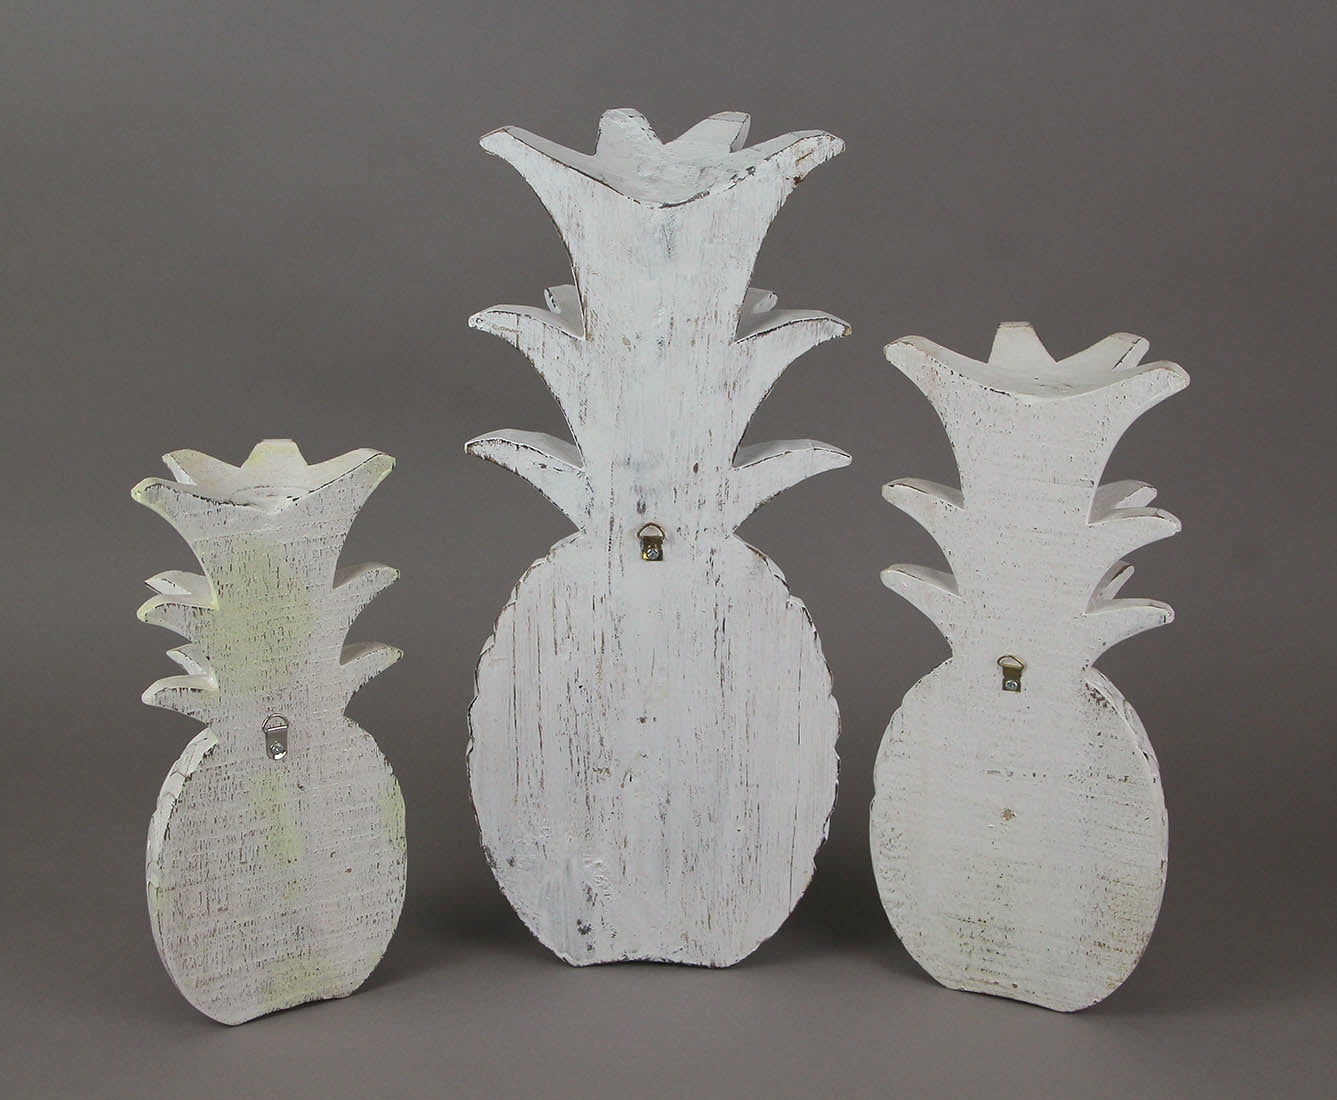 Chesapeake Bay Ltd White Pineapple Carved Wood Wall Sculptures Hanging Décor  (Set of 3)